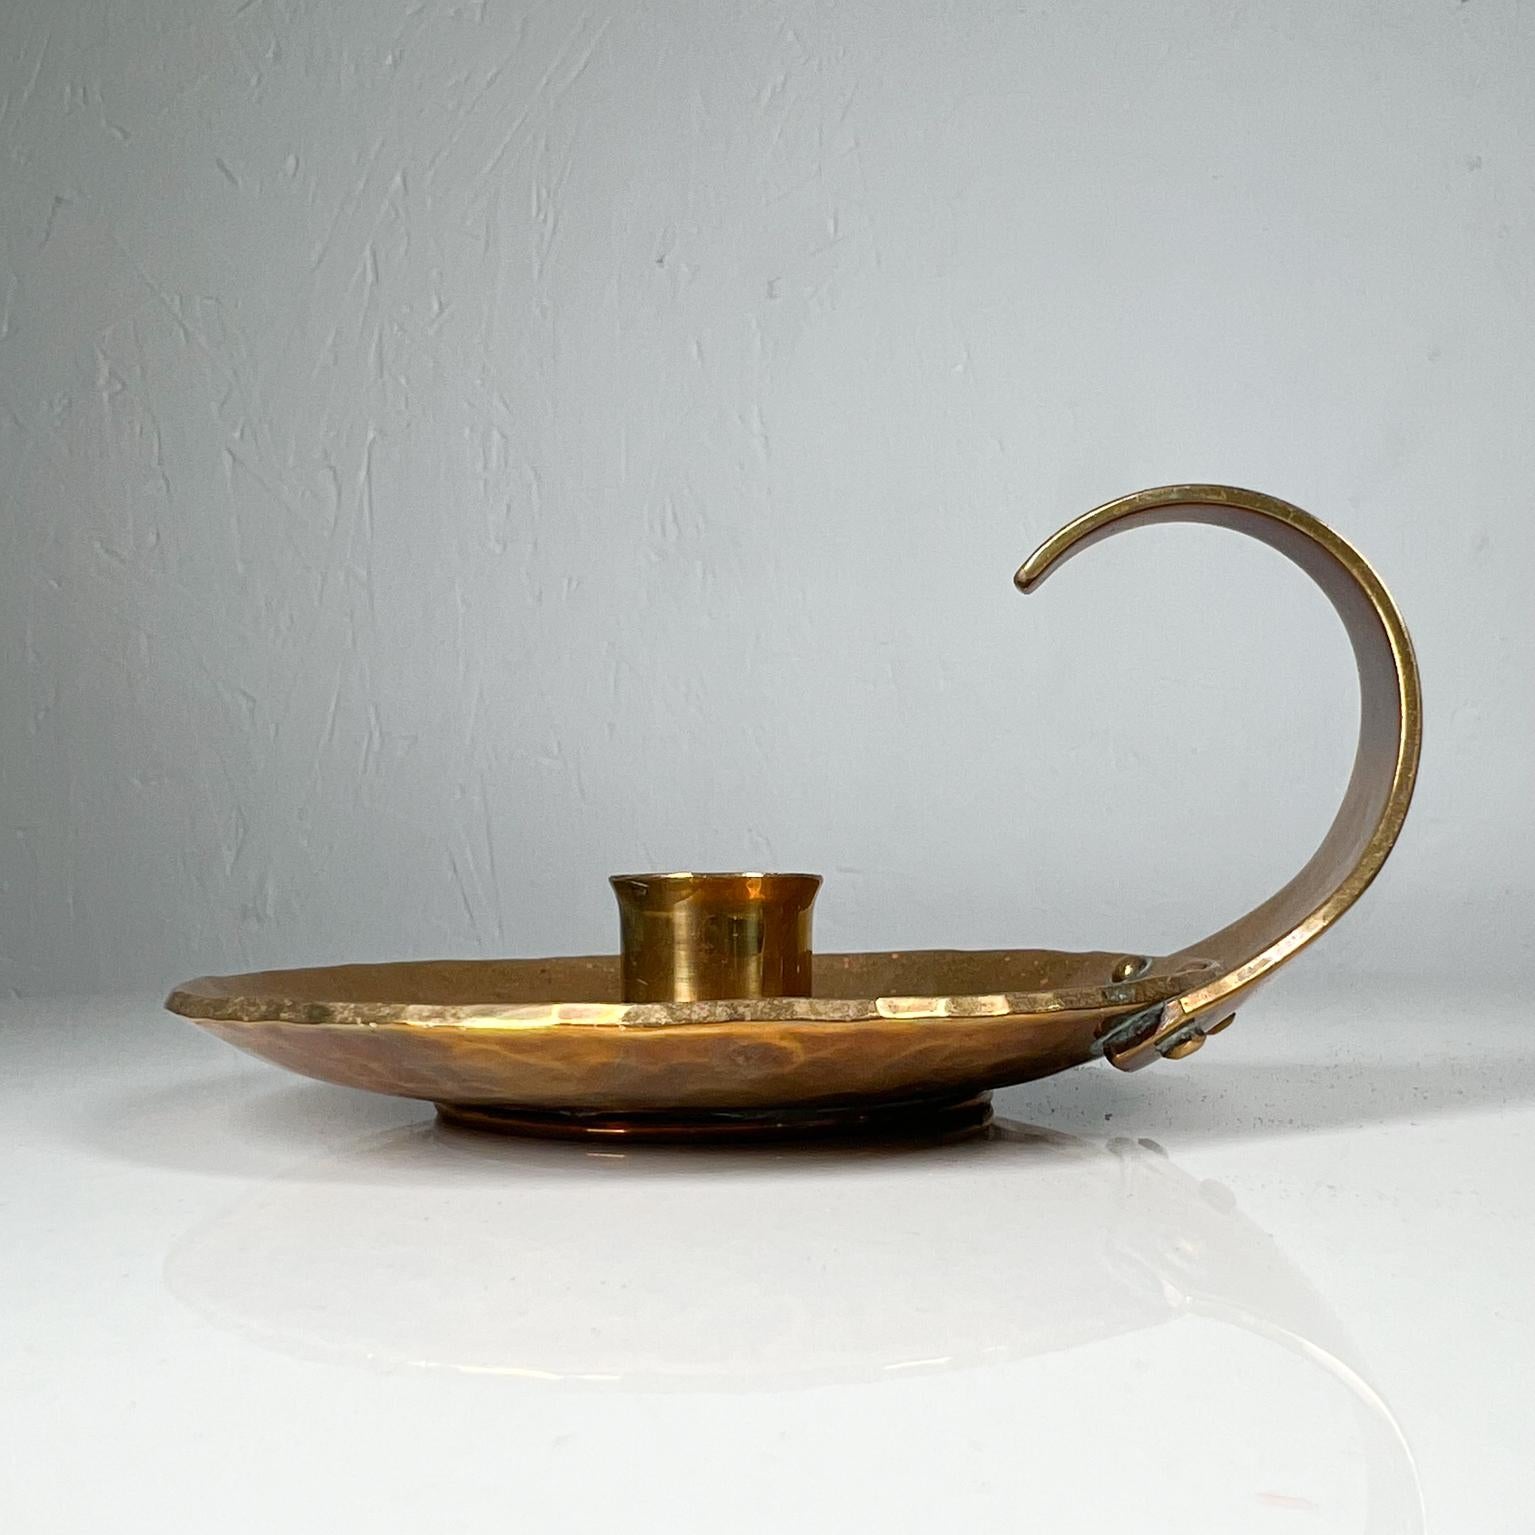 1989 HB sculptural chamber candle holder dish in brass
Measures: 2.5 tall x 4.5 diameter x 5.13 depth
Stamped at bottom.
Original vintage condition.
See listed images please.